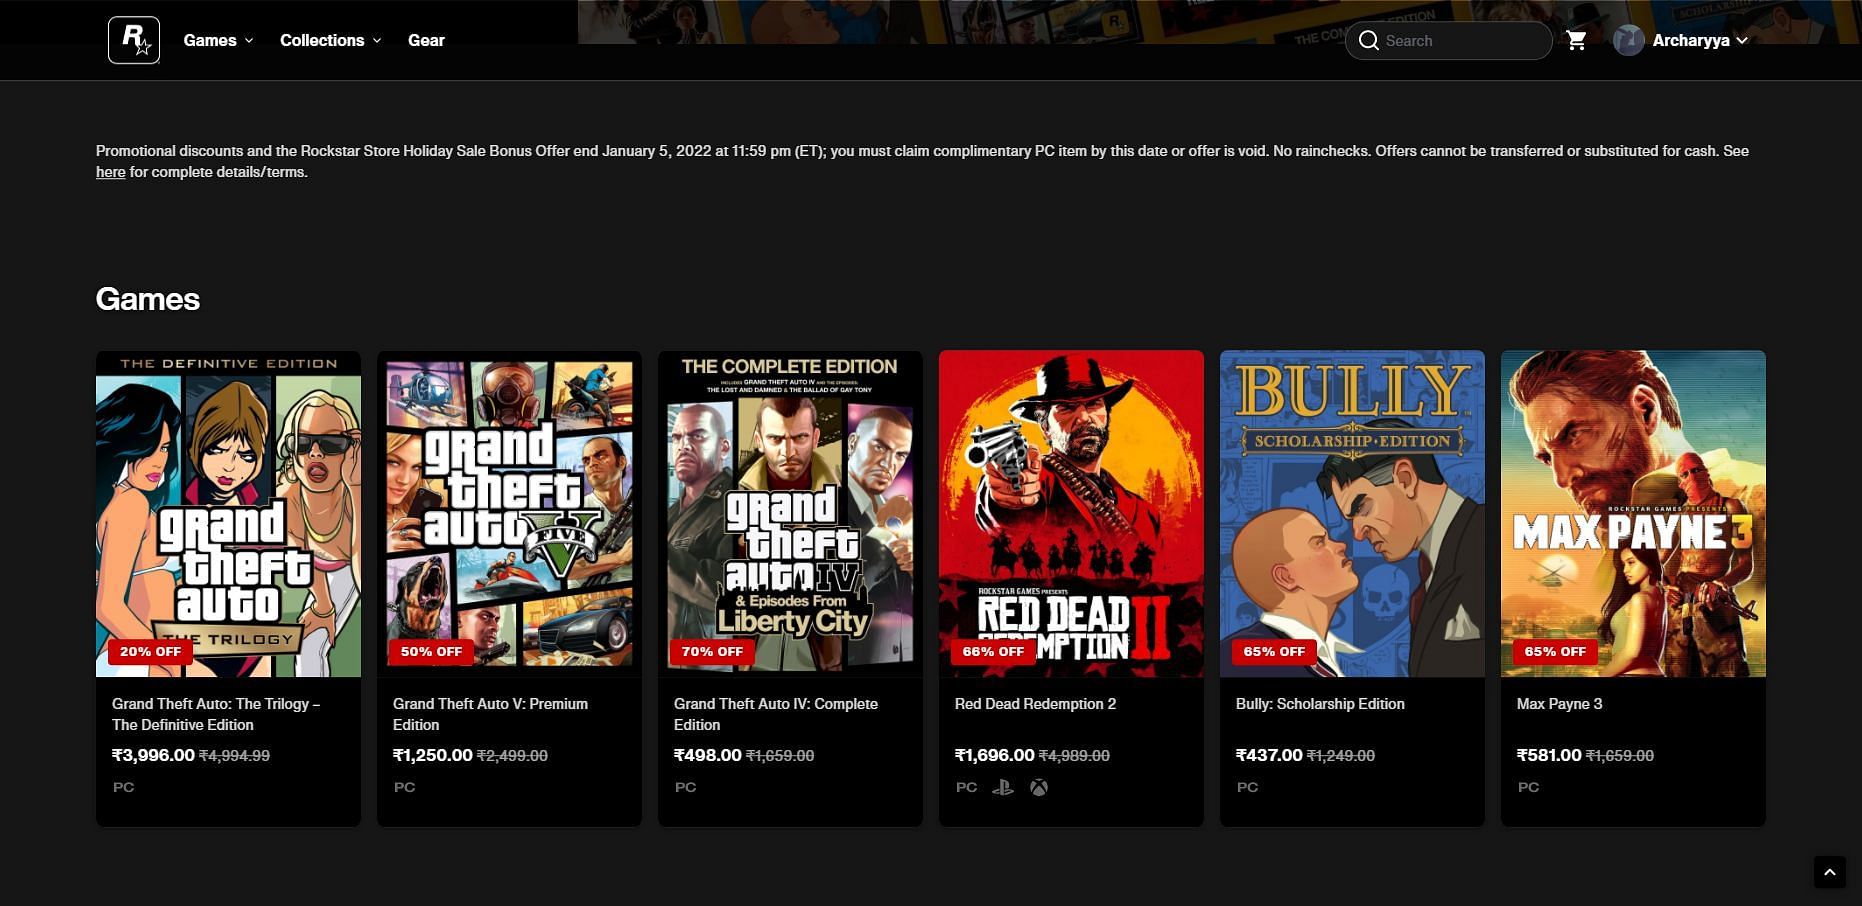 All of their titles are being sold at discounted prices for the holiday season (Image via Rockstar Store)